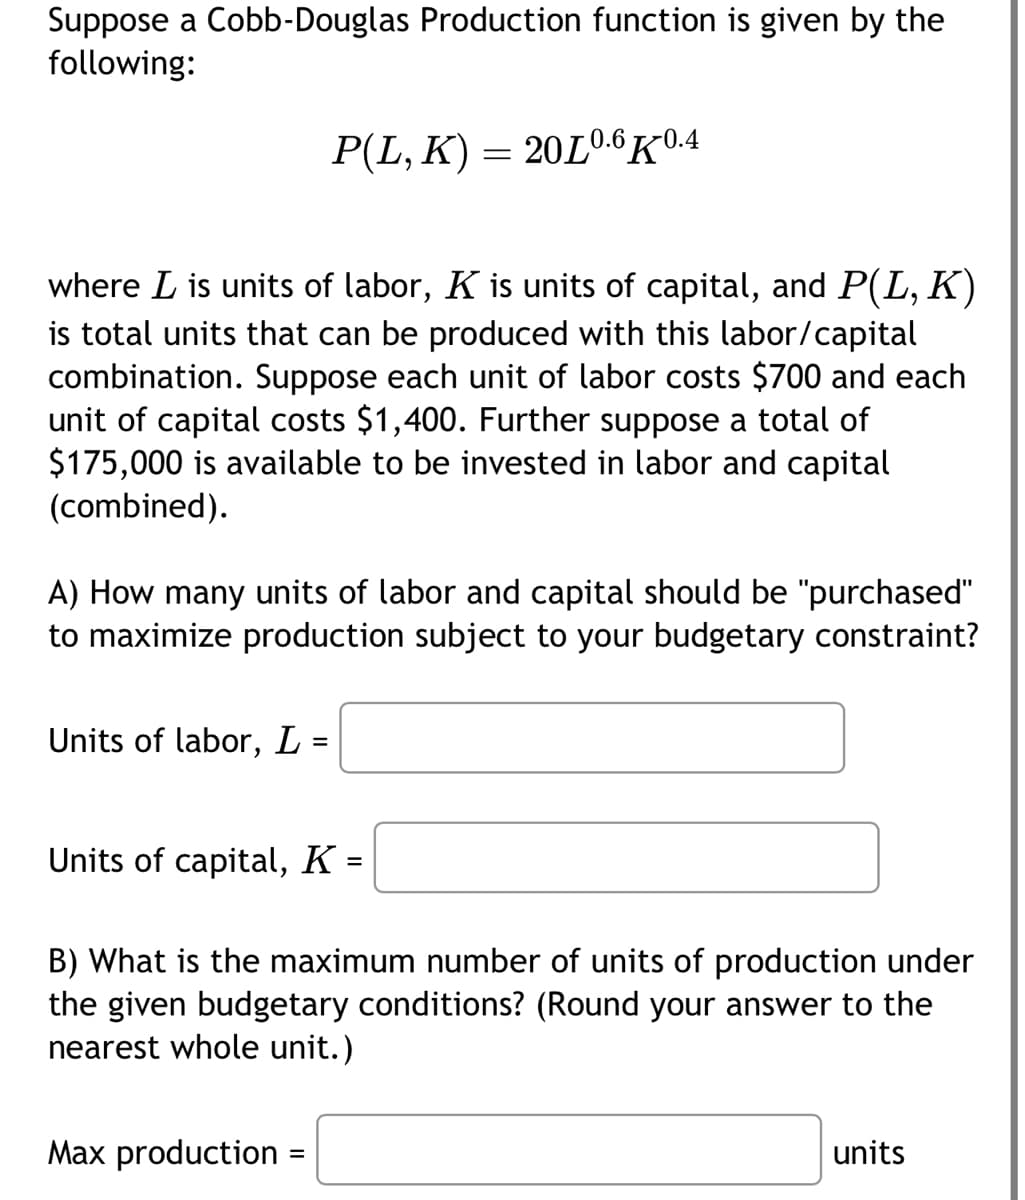 Suppose a Cobb-Douglas Production function is given by the
following:
where L is units of labor, K is units of capital, and P(L, K)
is total units that can be produced with this labor/capital
combination. Suppose each unit of labor costs $700 and each
unit of capital costs $1,400. Further suppose a total of
$175,000 ilab to be invested in labor and capital
(combined).
A) How many units of labor and capital should be "purchased"
to maximize production subject to your budgetary constraint?
Units of labor, L =
P(L, K) = 20L0.6 K0.4
Units of capital, K =
B) What is the maximum number of units of production under
the given budgetary conditions? (Round your answer to the
nearest whole unit.)
Max production
=
units